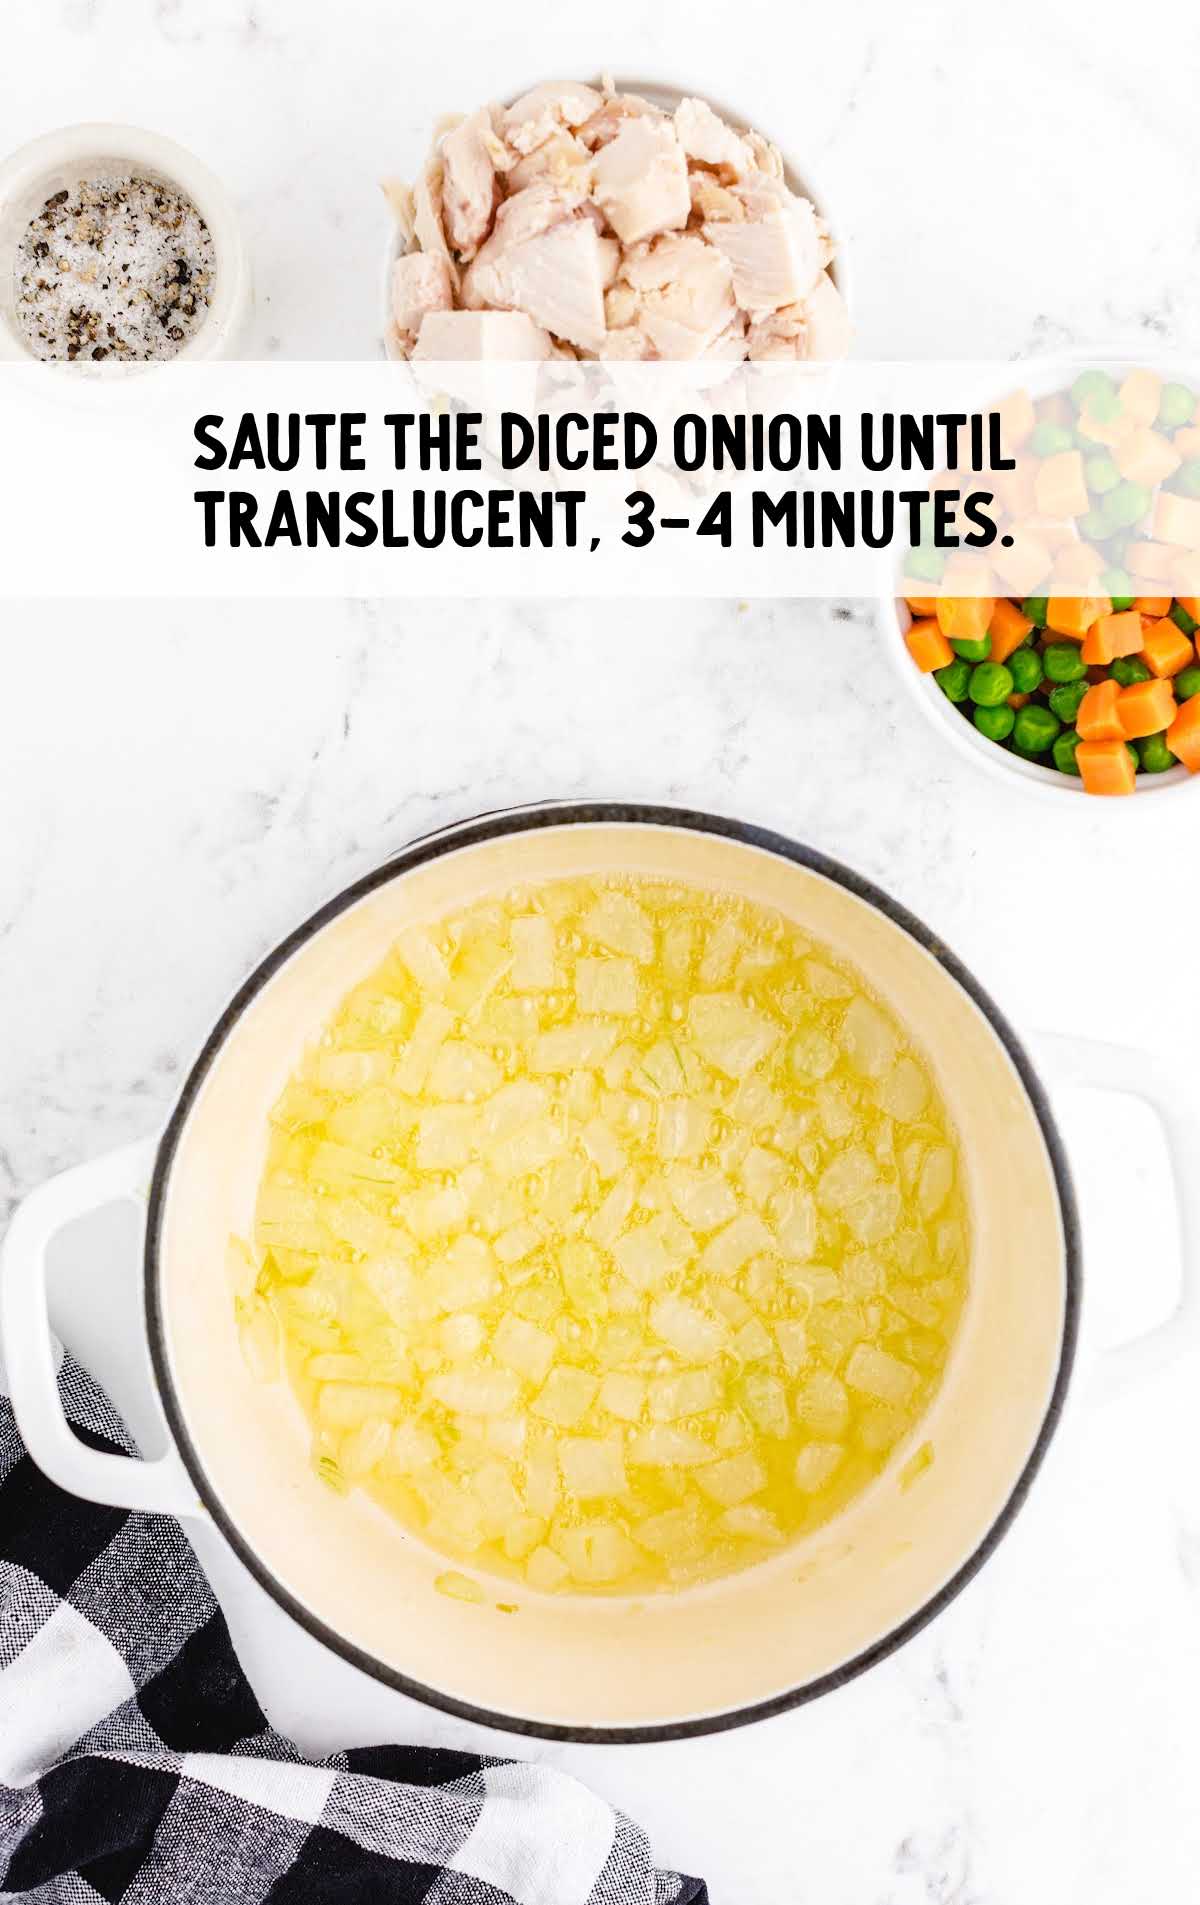 diced onions saute for about 3-4 minutes